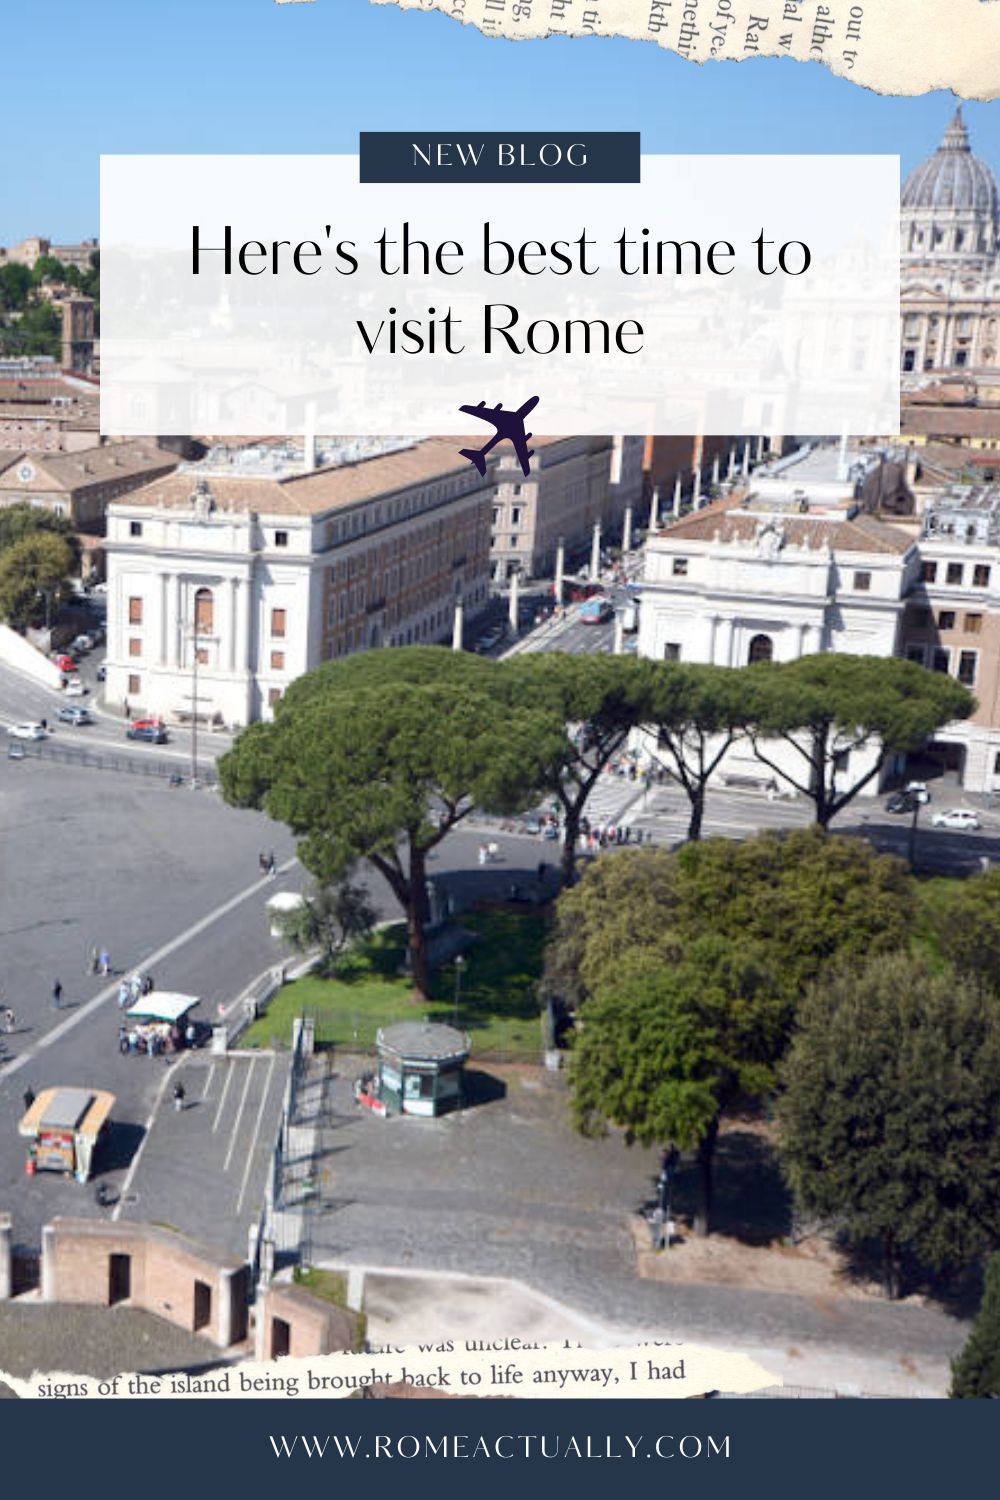 Pinterest image with one photo of Rome and a caption reading "Here's the best time to visit Rome".